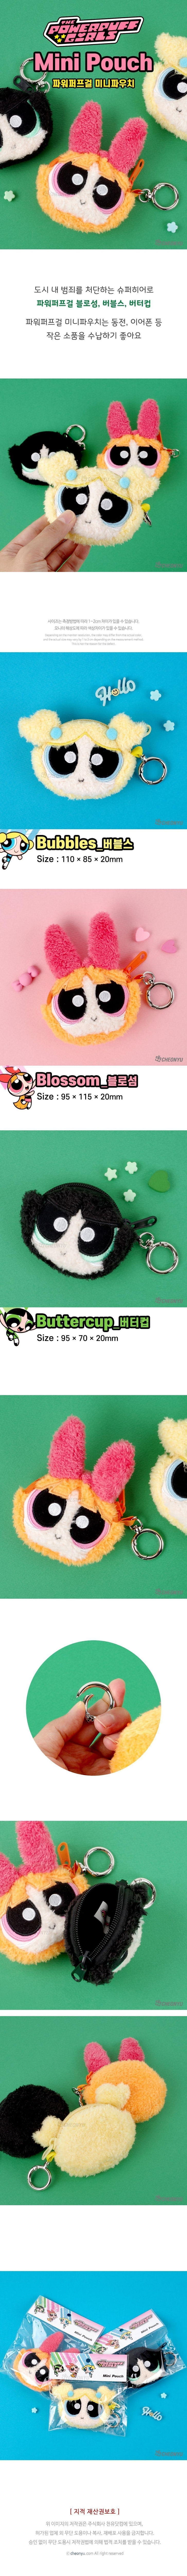 power-puff-girl-mini-pouch-wholesales